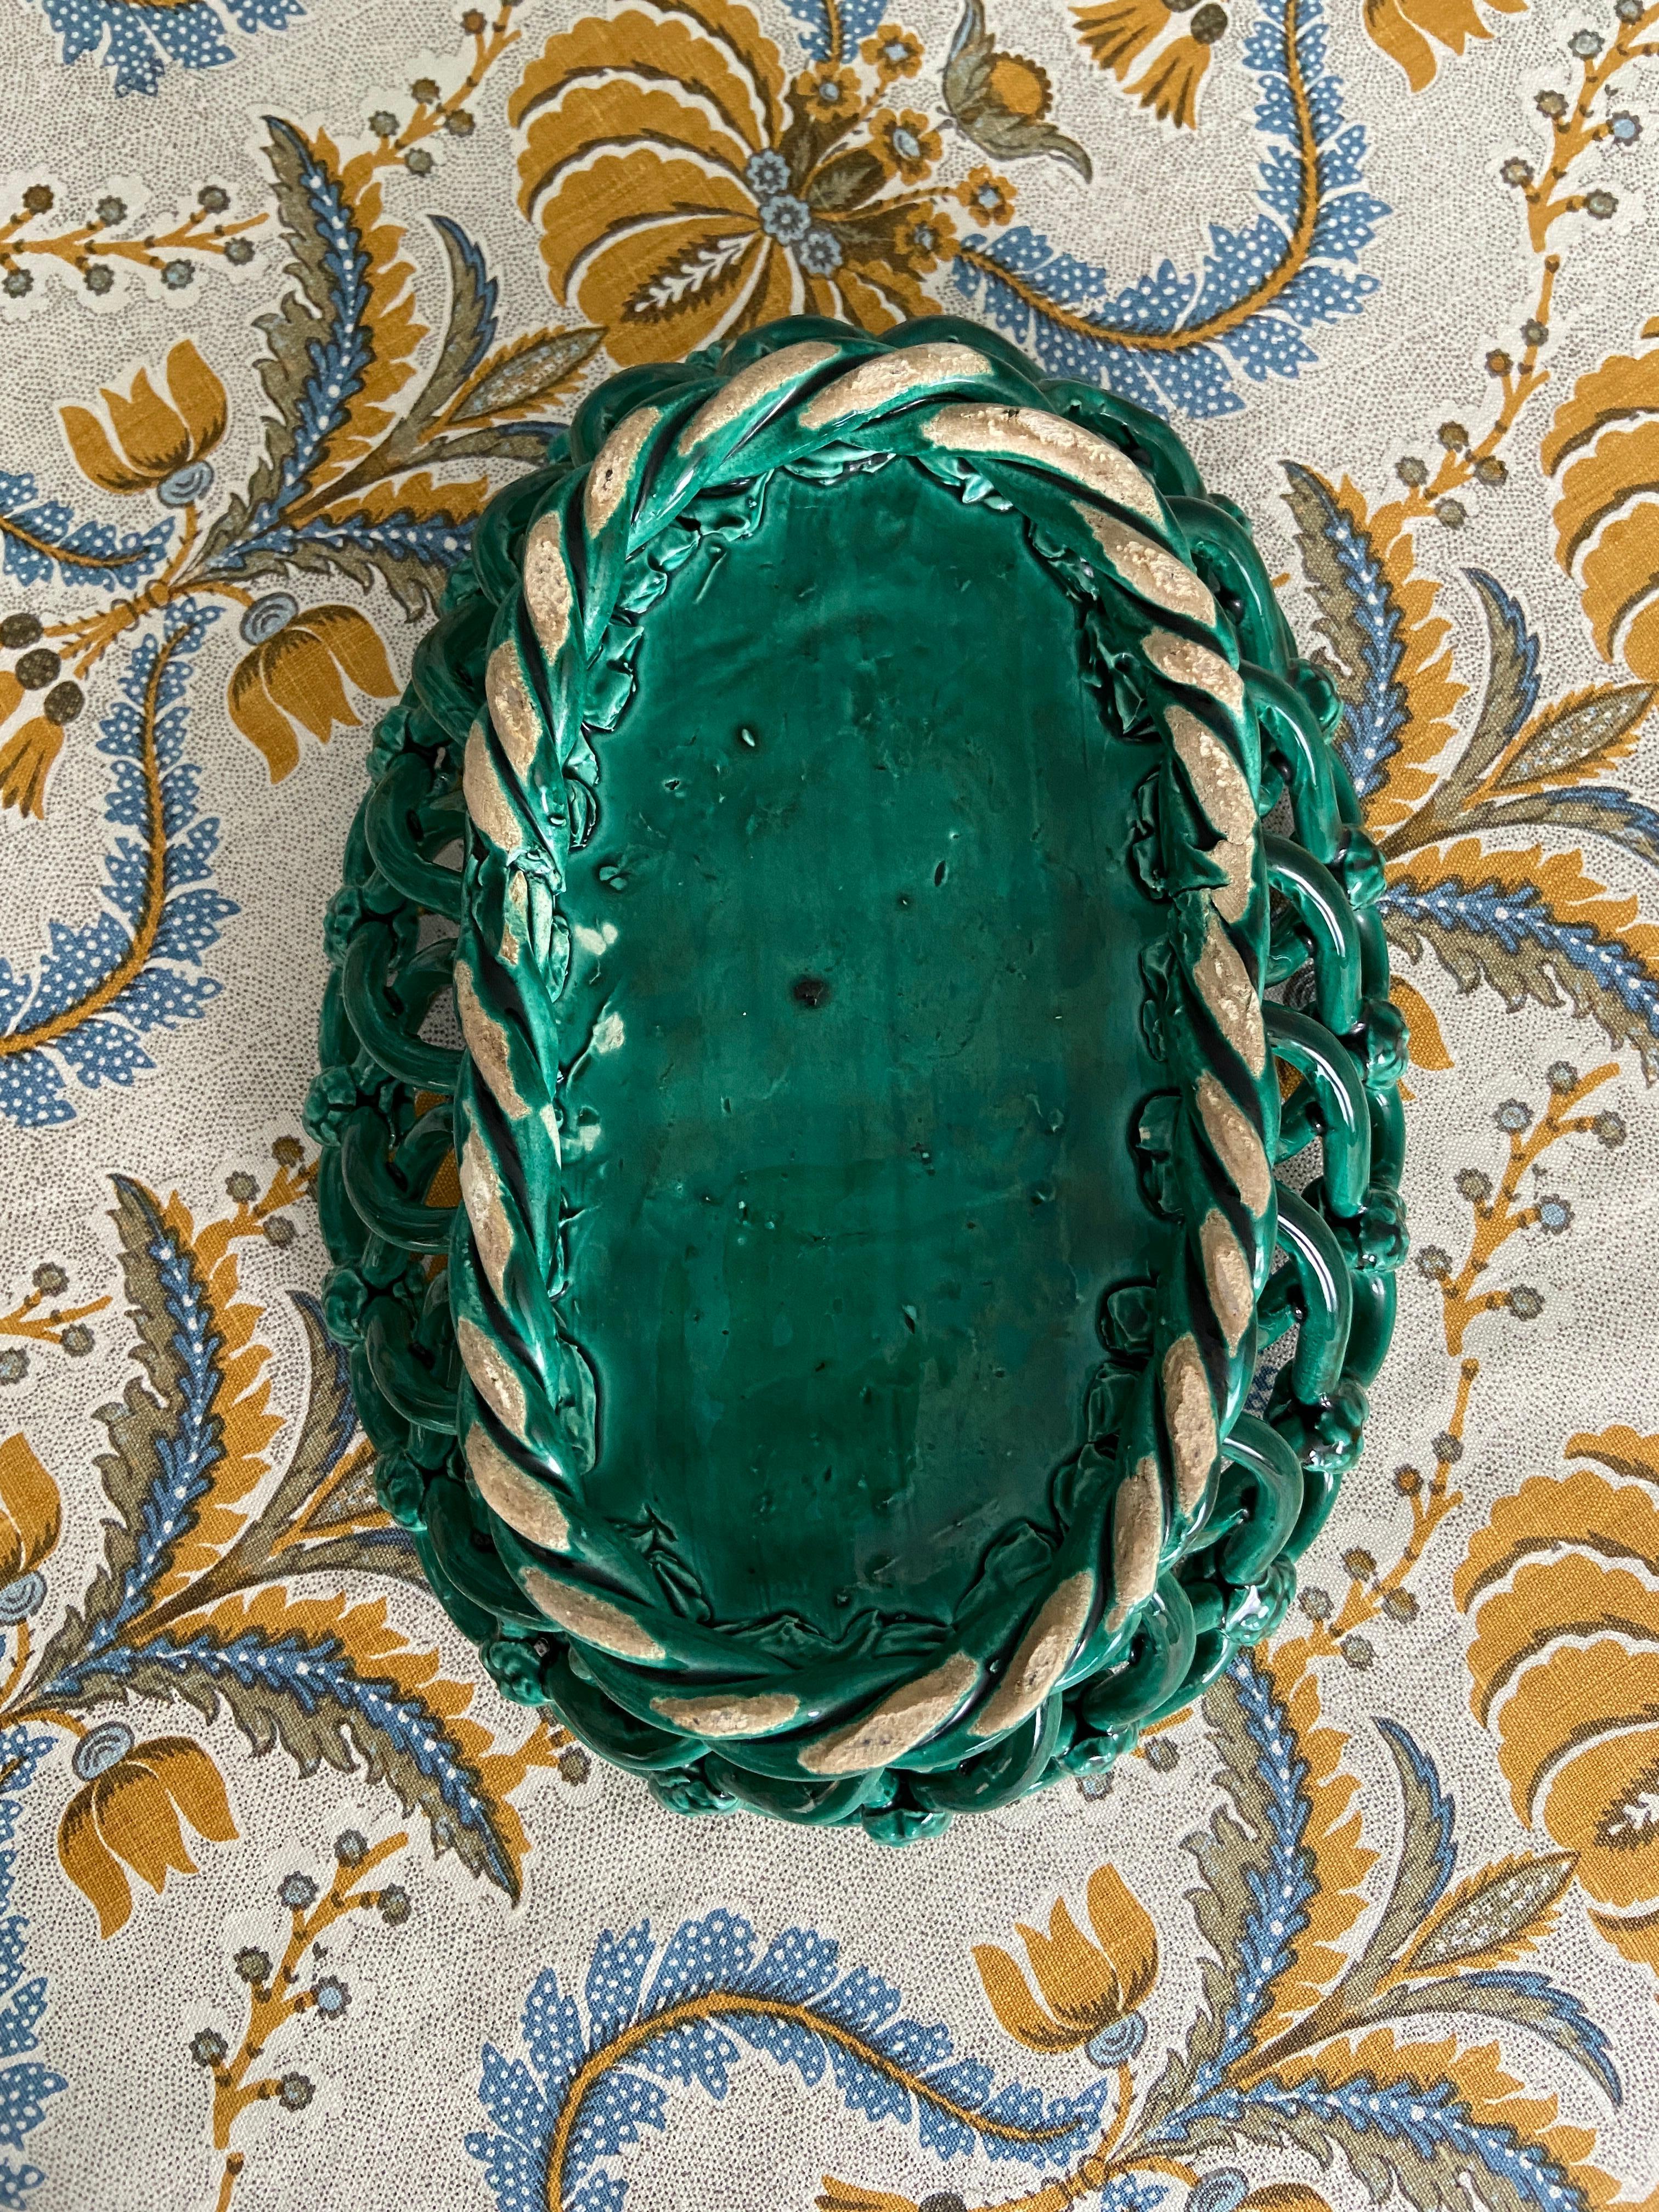 Mid-20th Century Vintage Vallauris Woven Ceramic Basket in Green Glaze, France, 1940s For Sale